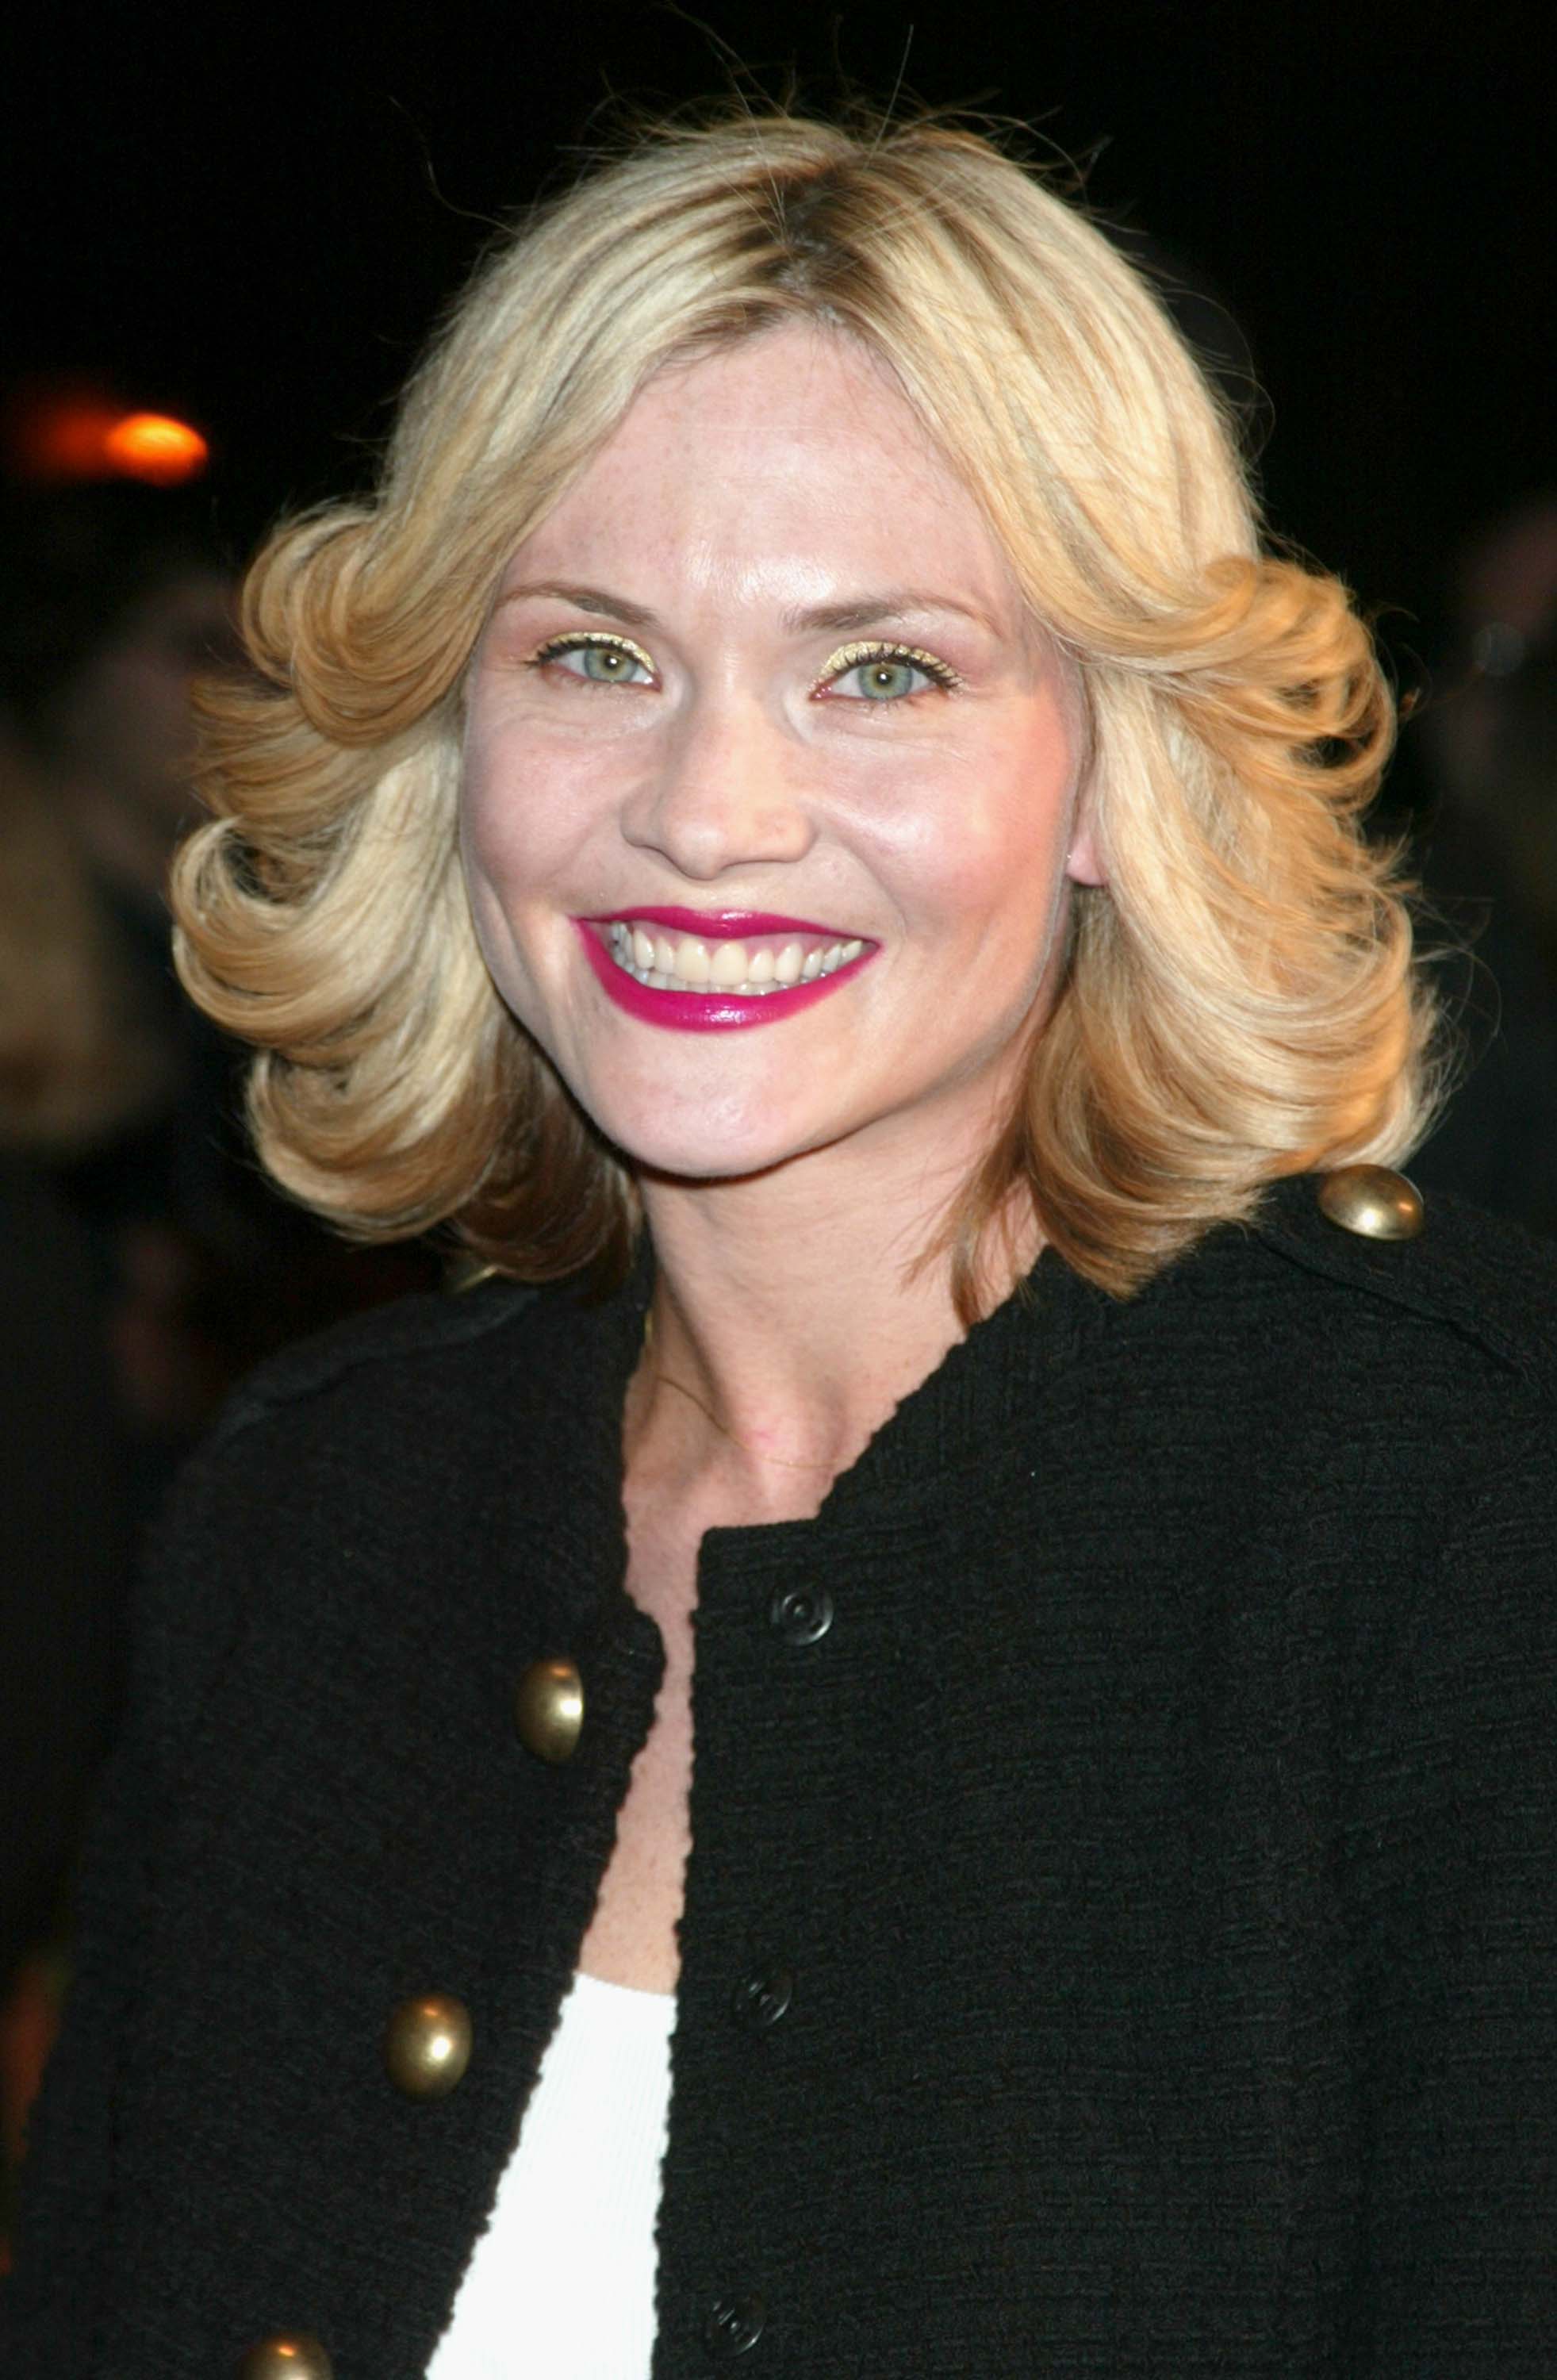 Amy Locane at the premiere of "Secretary" in New York City on September 18, 2002 | Source: Getty Images